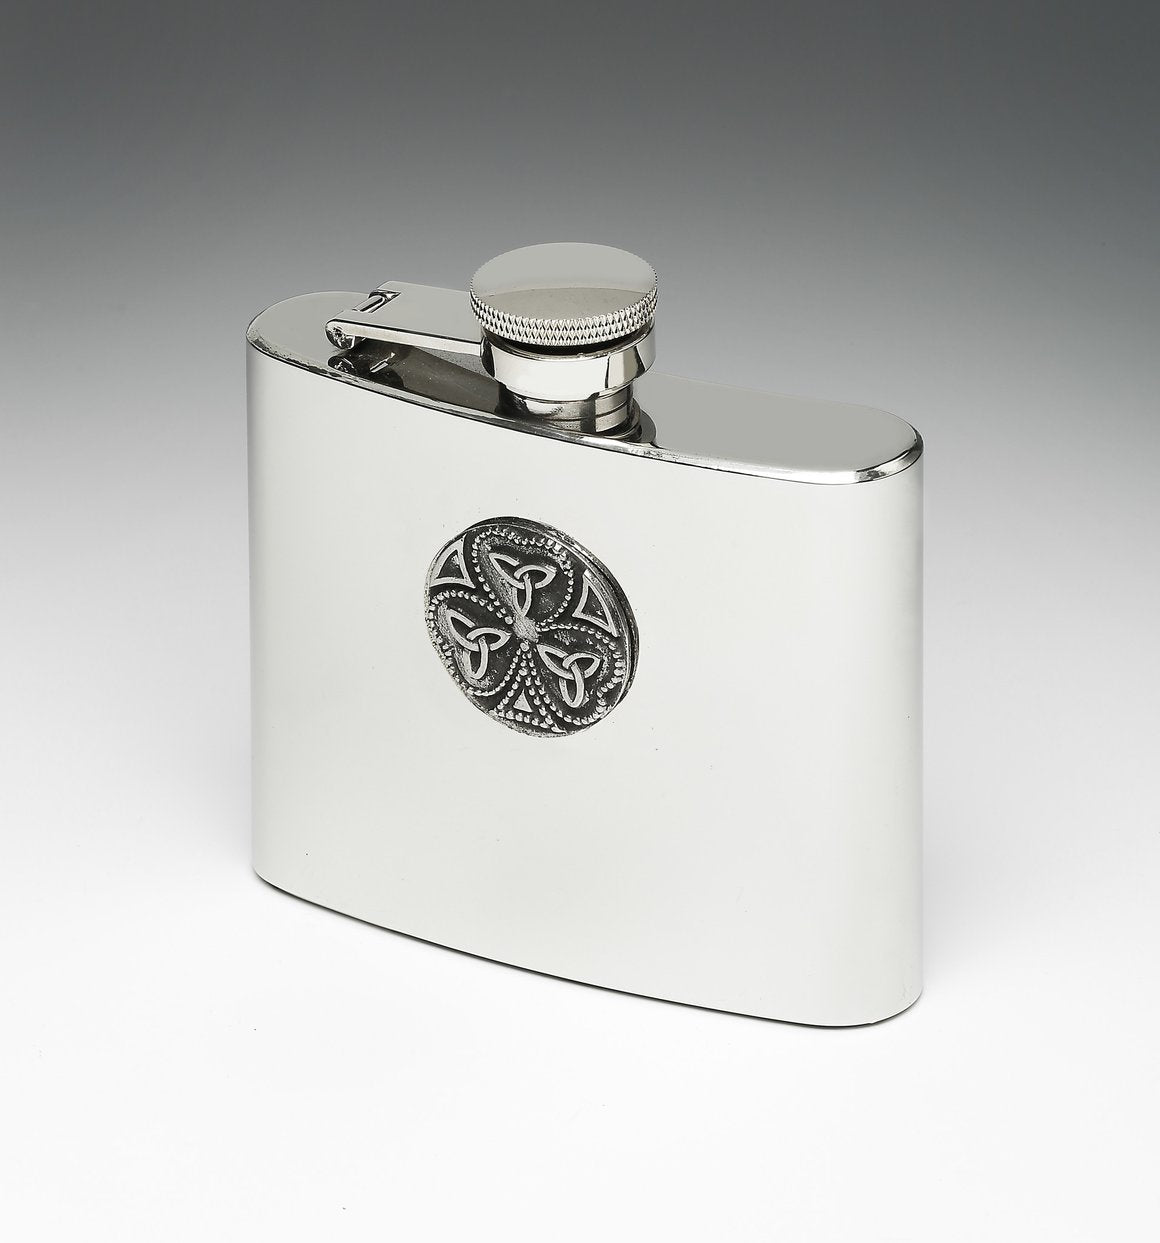 Whiskey Hip Flask with Shamrock and Trinity Knot Design by Mullingar Pewter